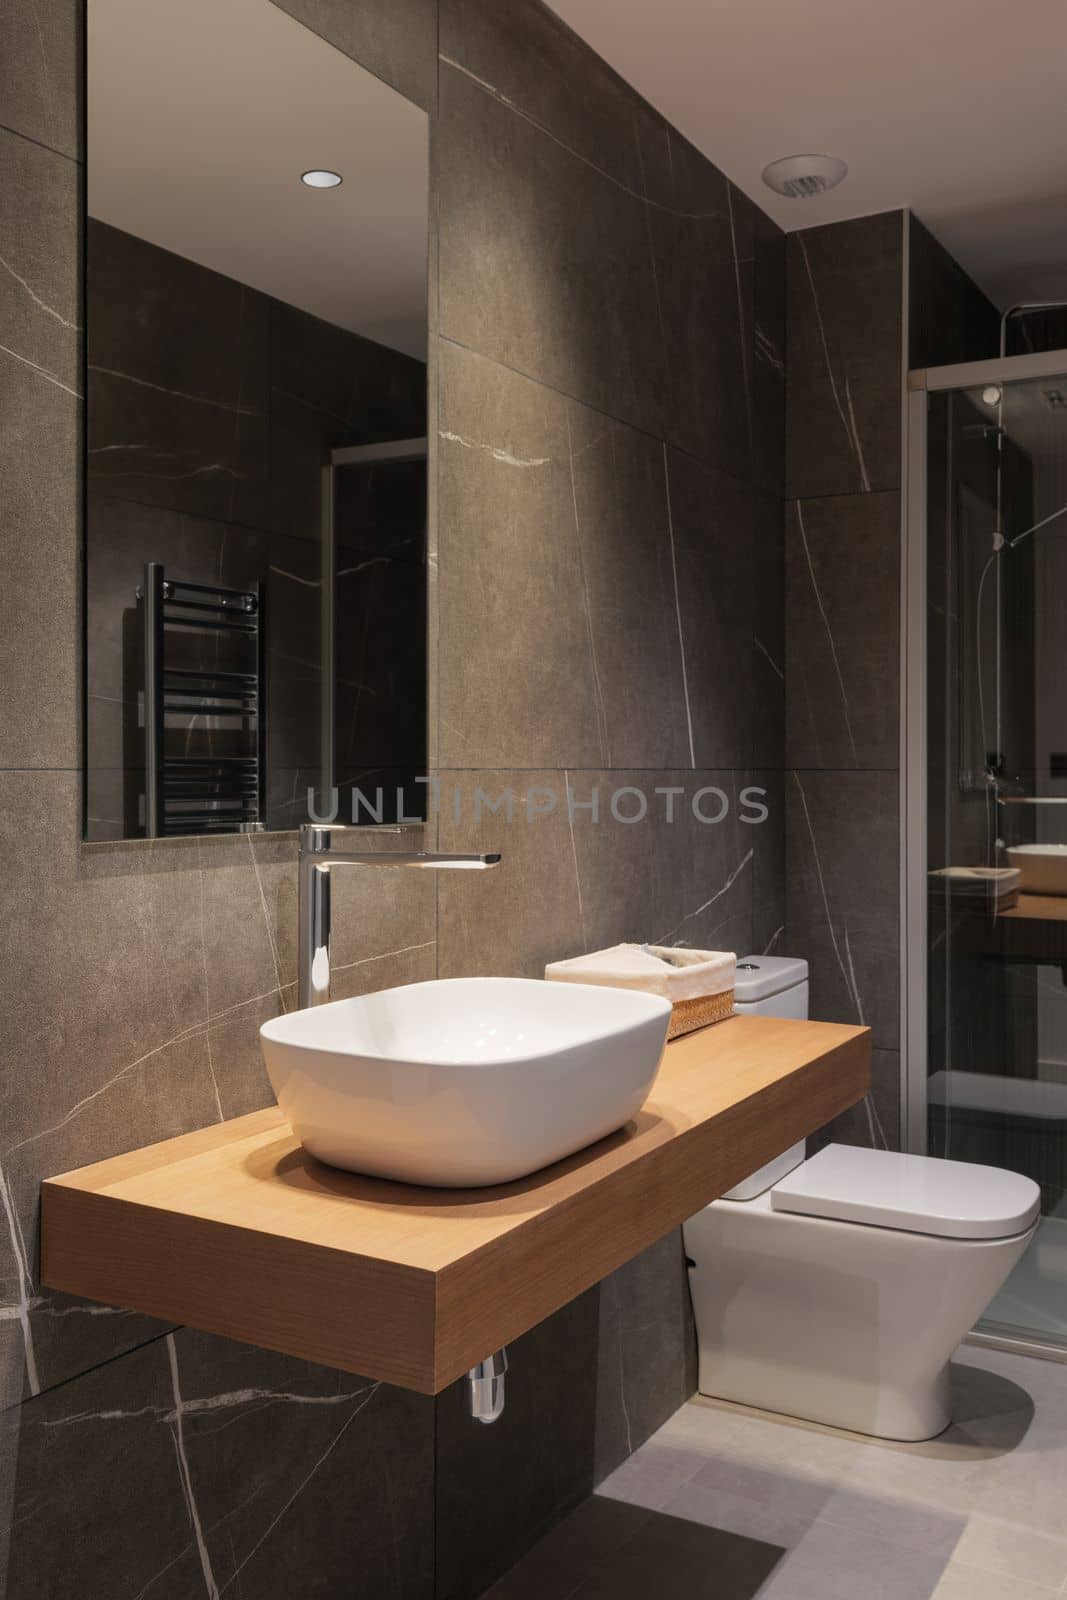 Beam from lamp illuminates white deep sink on marble countertop in noble wood color. Large mirror on wall reflects opposite side with heated towel rail. Modern design bathroom with dark marble walls. by apavlin